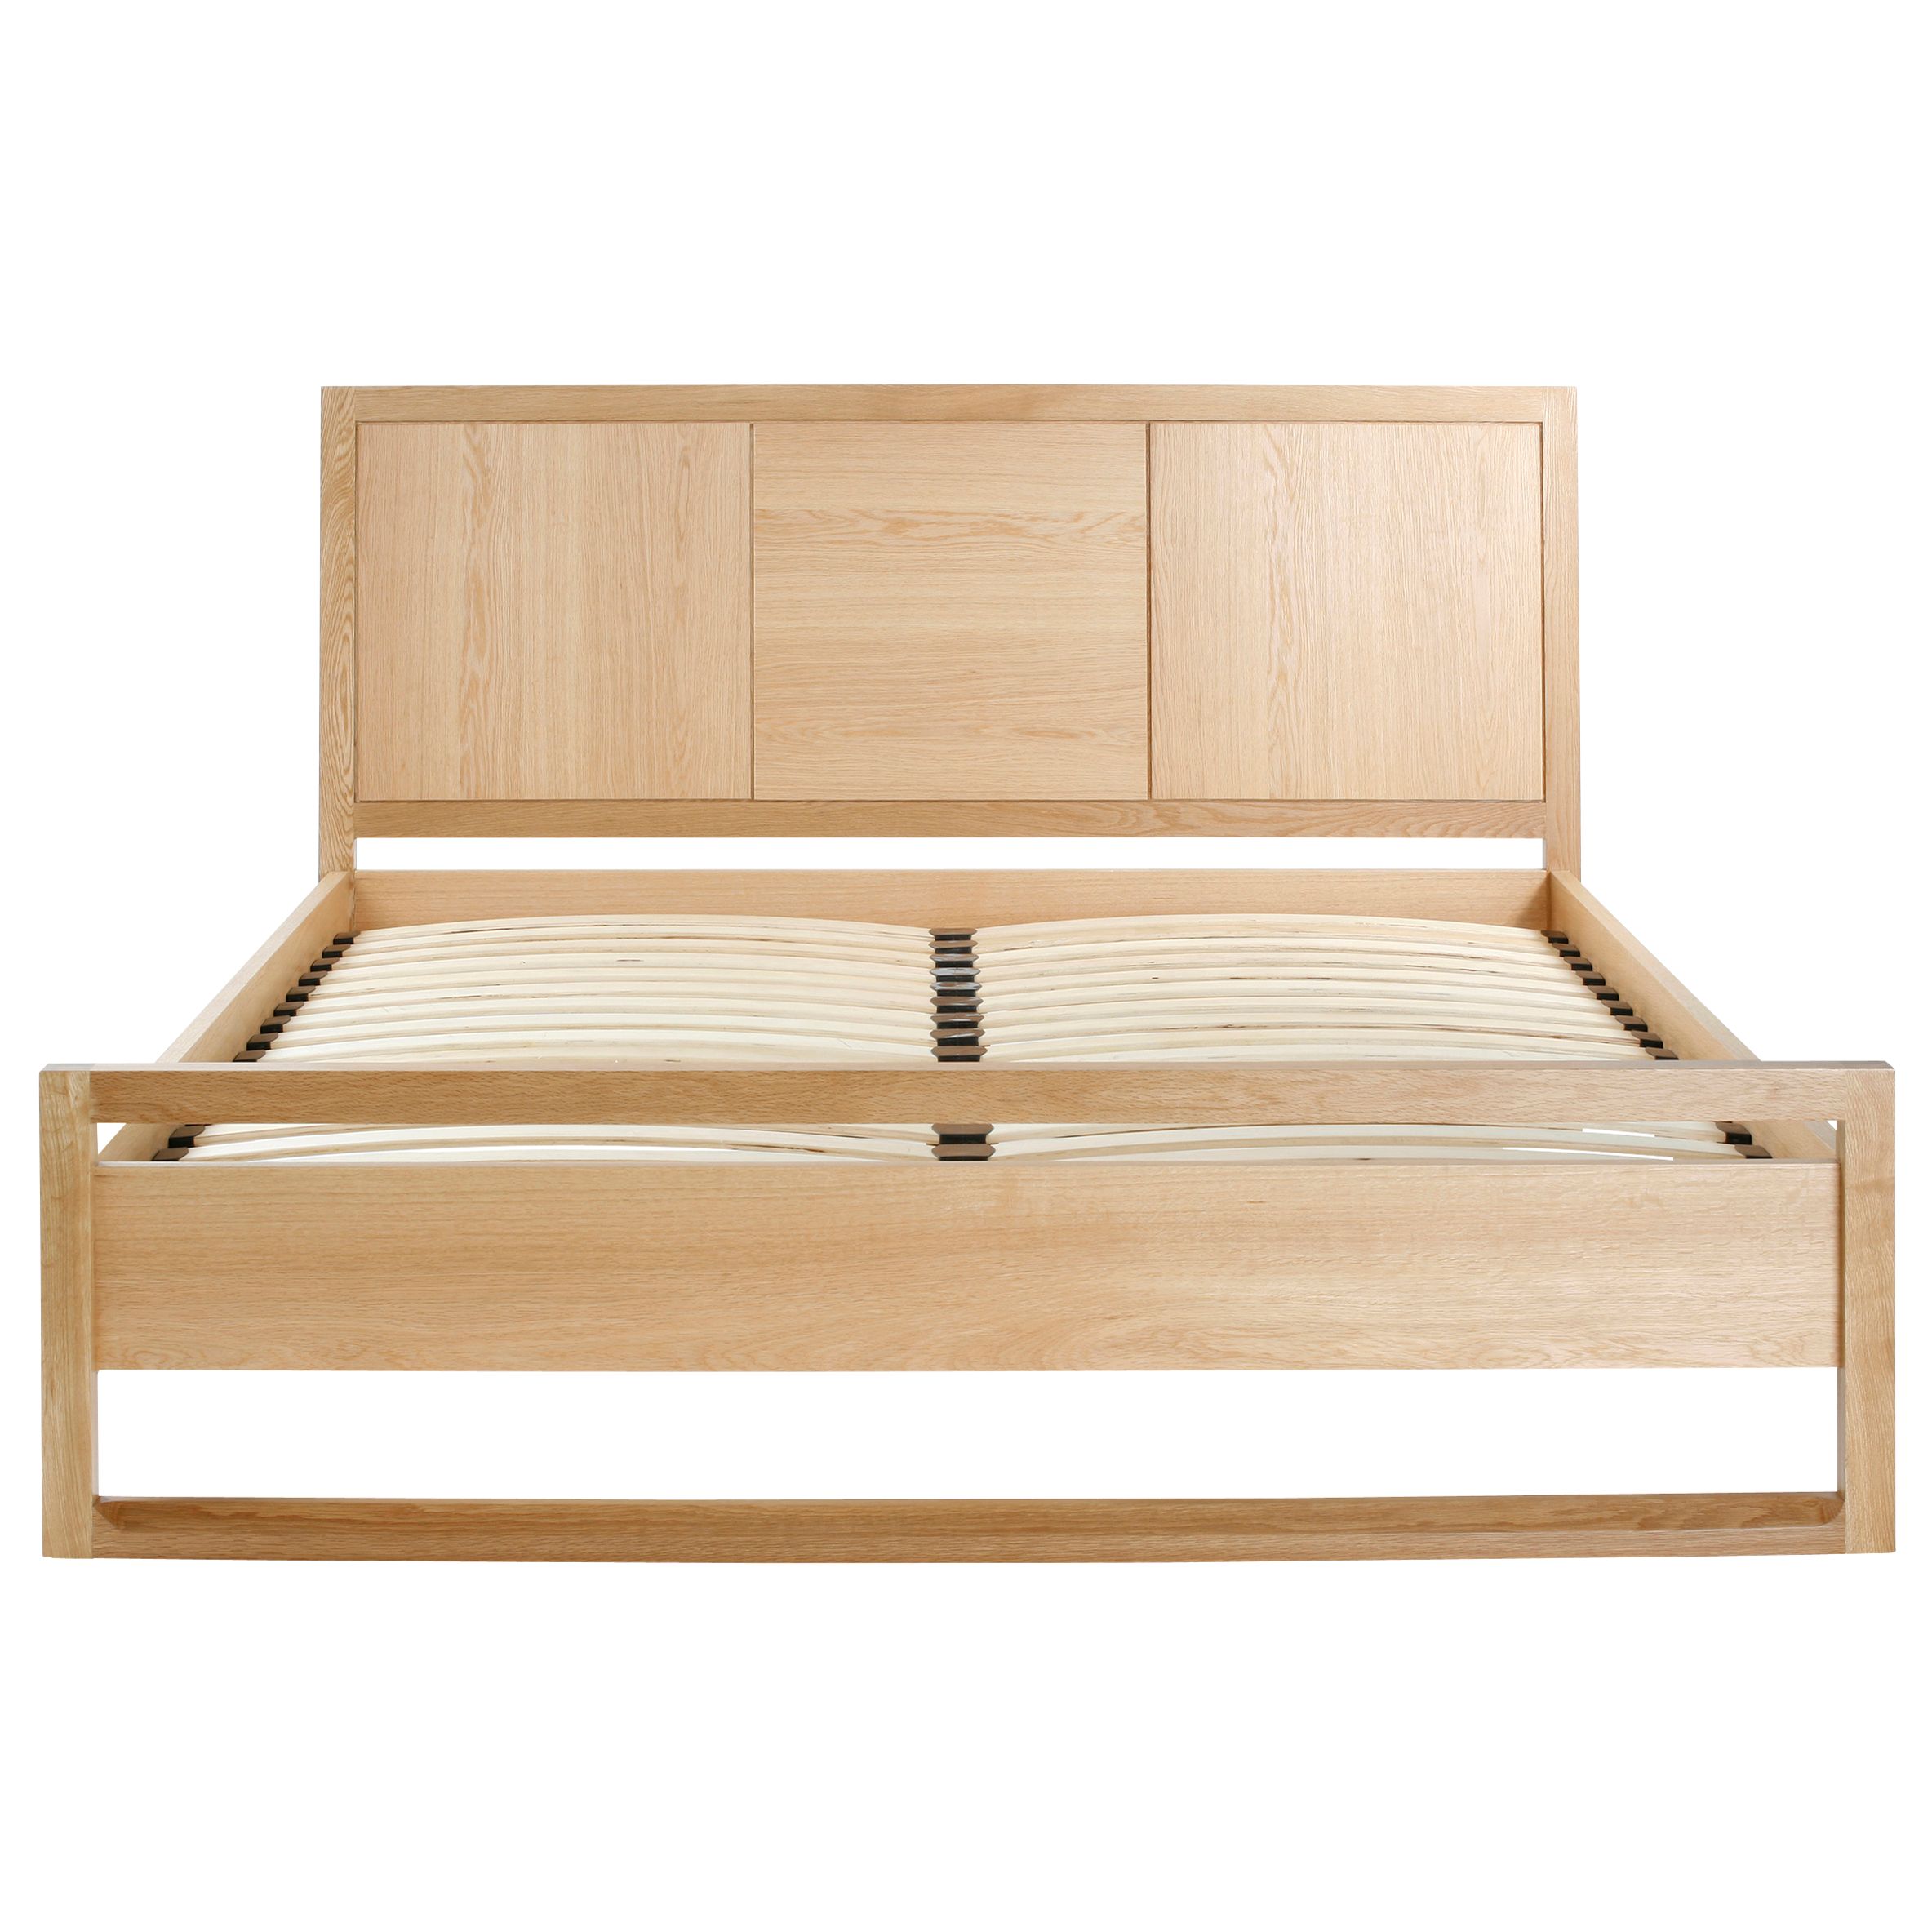 John Lewis Carson Bedstead, Double at JohnLewis